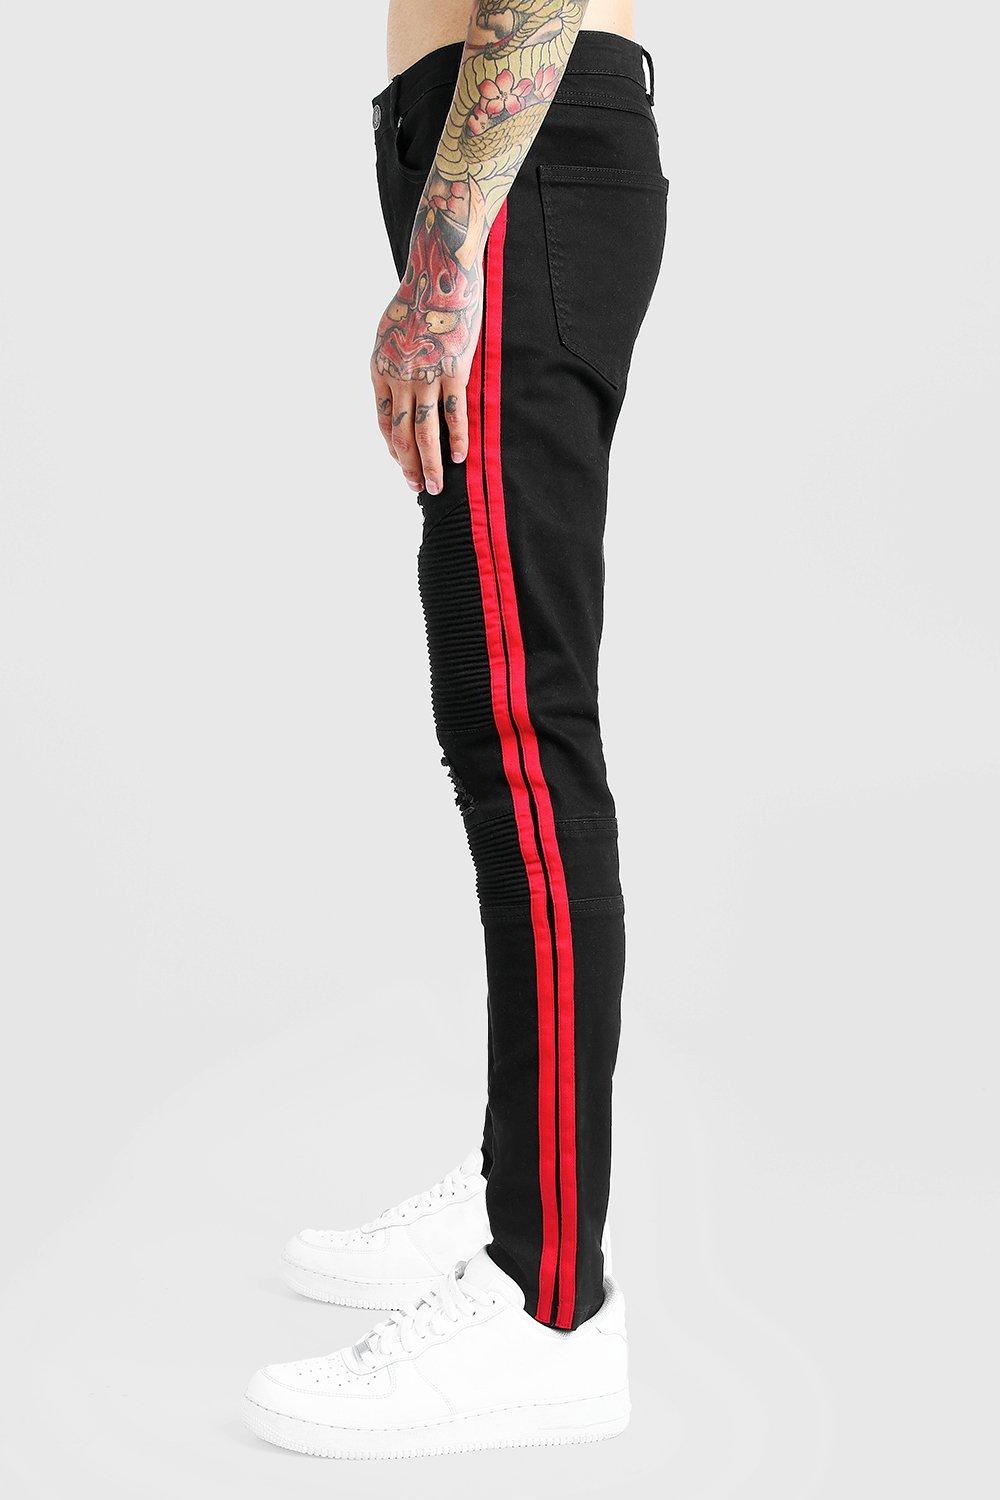 black and red biker jeans